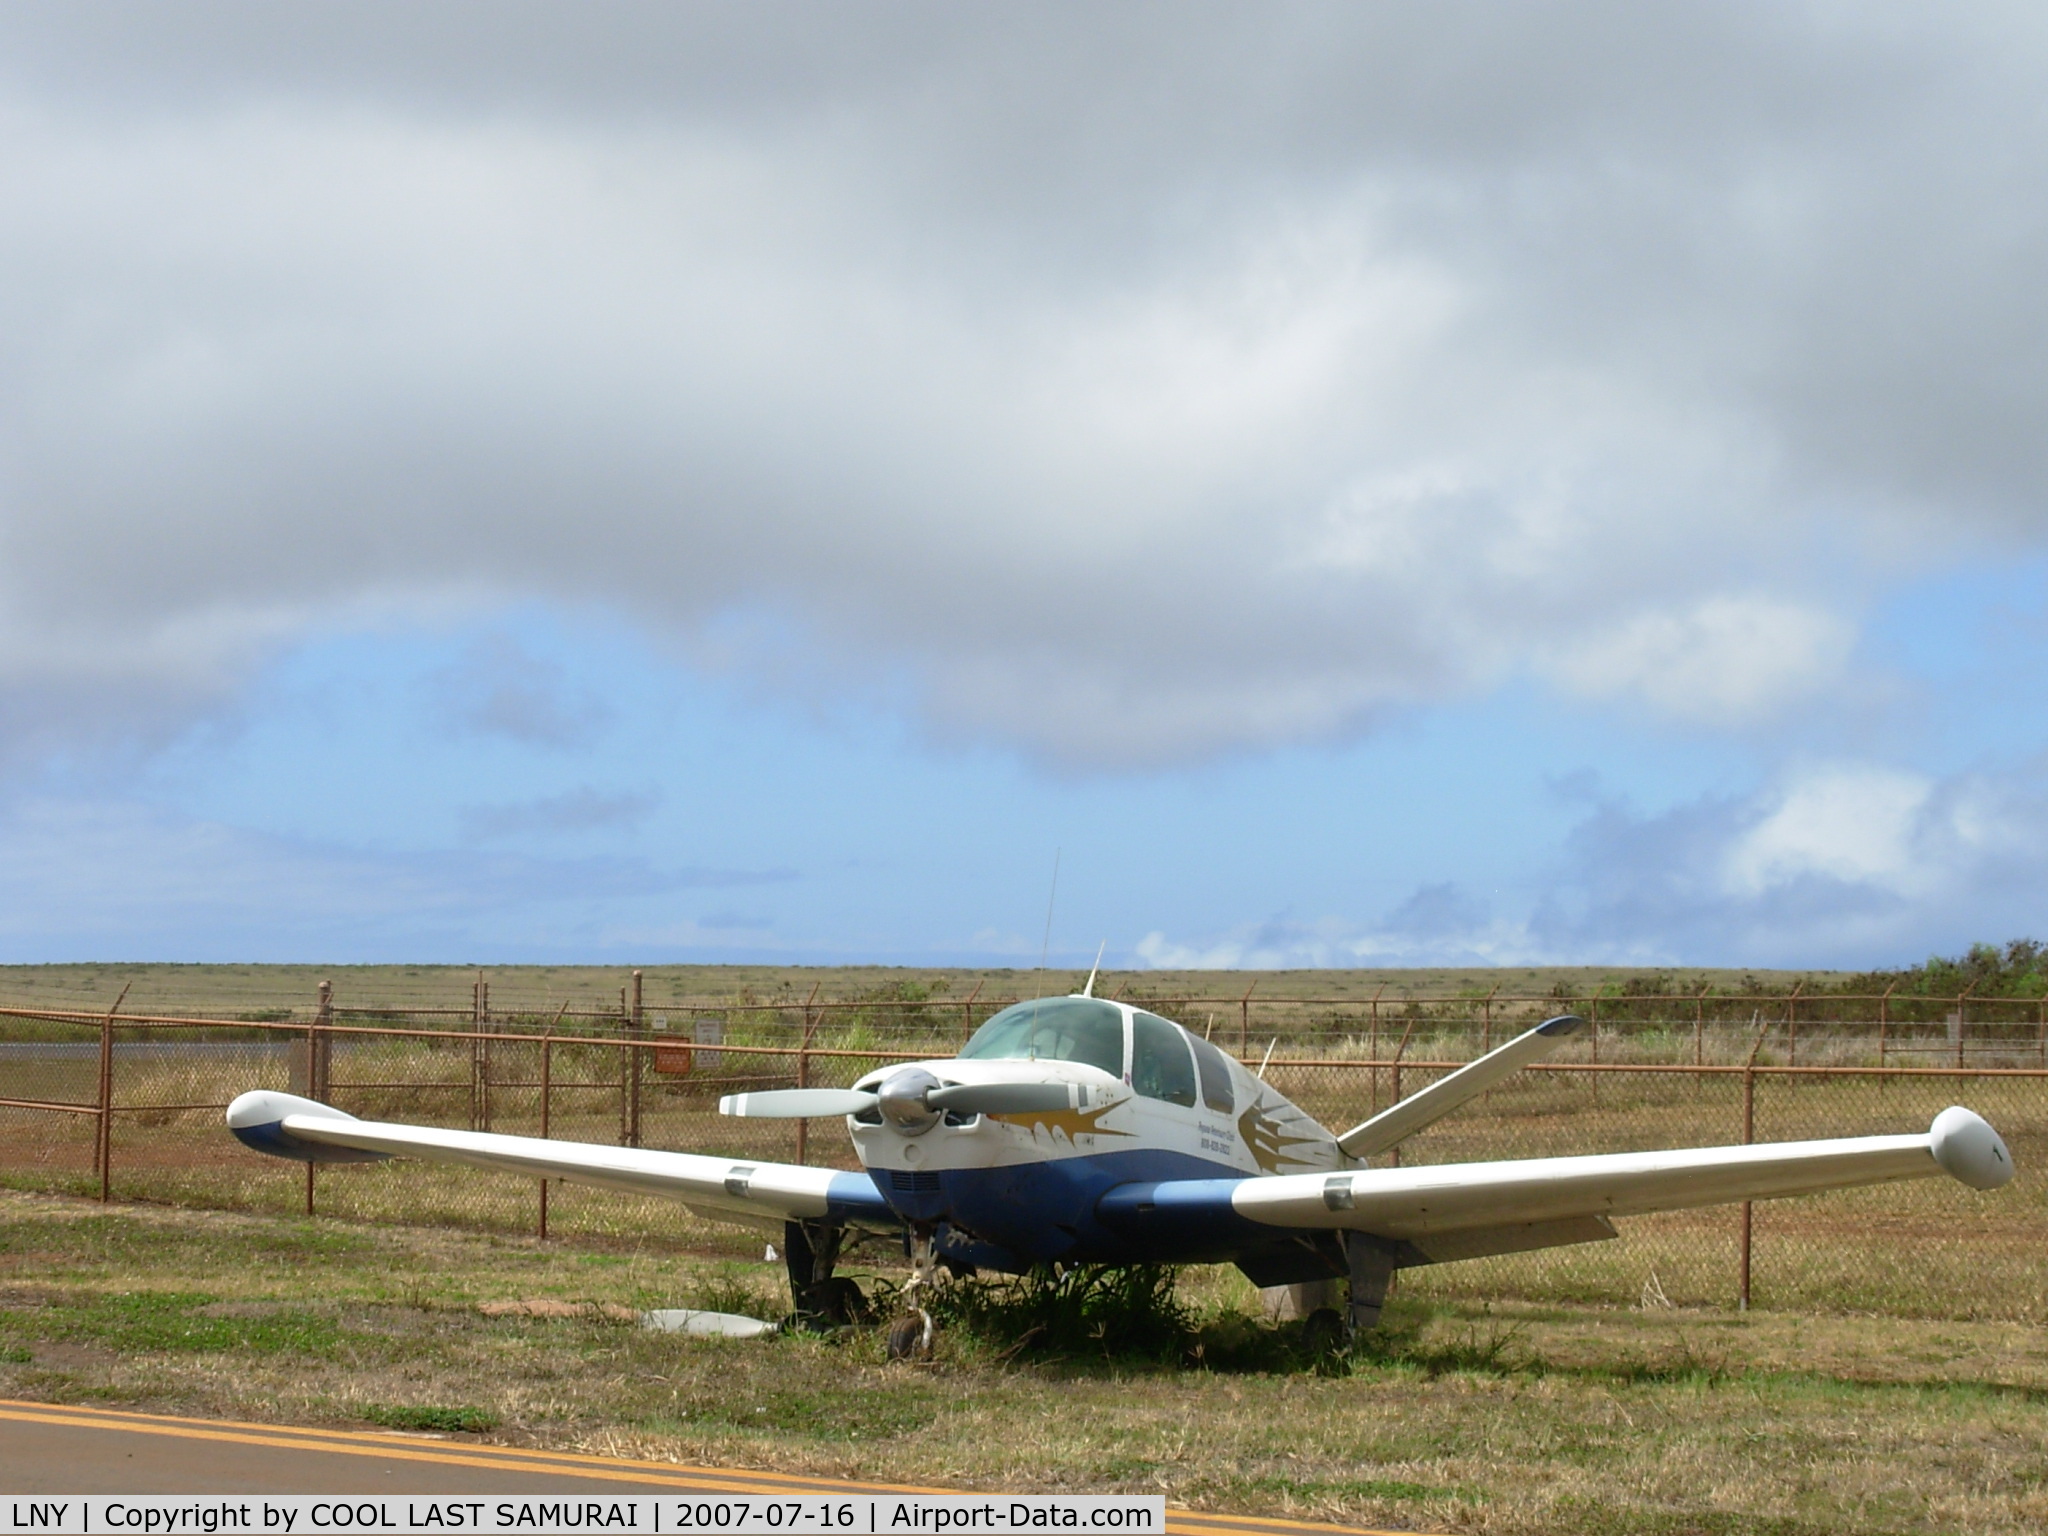 Lanai Airport (LNY) - A V-TAIL BEECH SITTING ON LNY TRANSIENT PARKING FOR A LONG LONG TIME